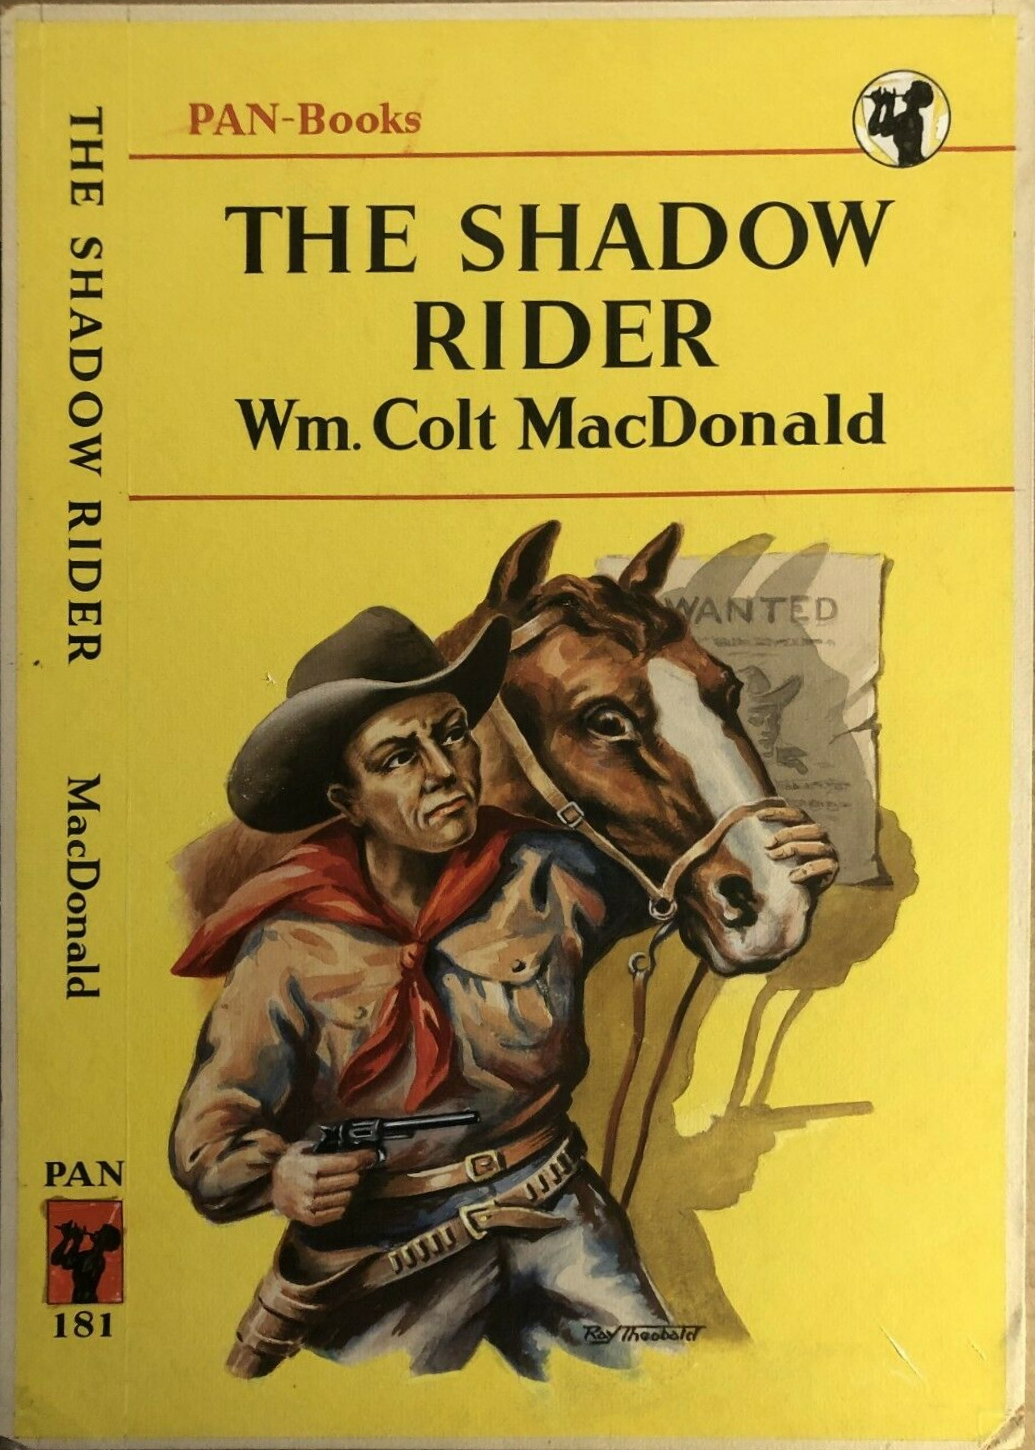 Ray Theobald - The Shadow Rider by William Colt McDonald (Pan Books) - 1952